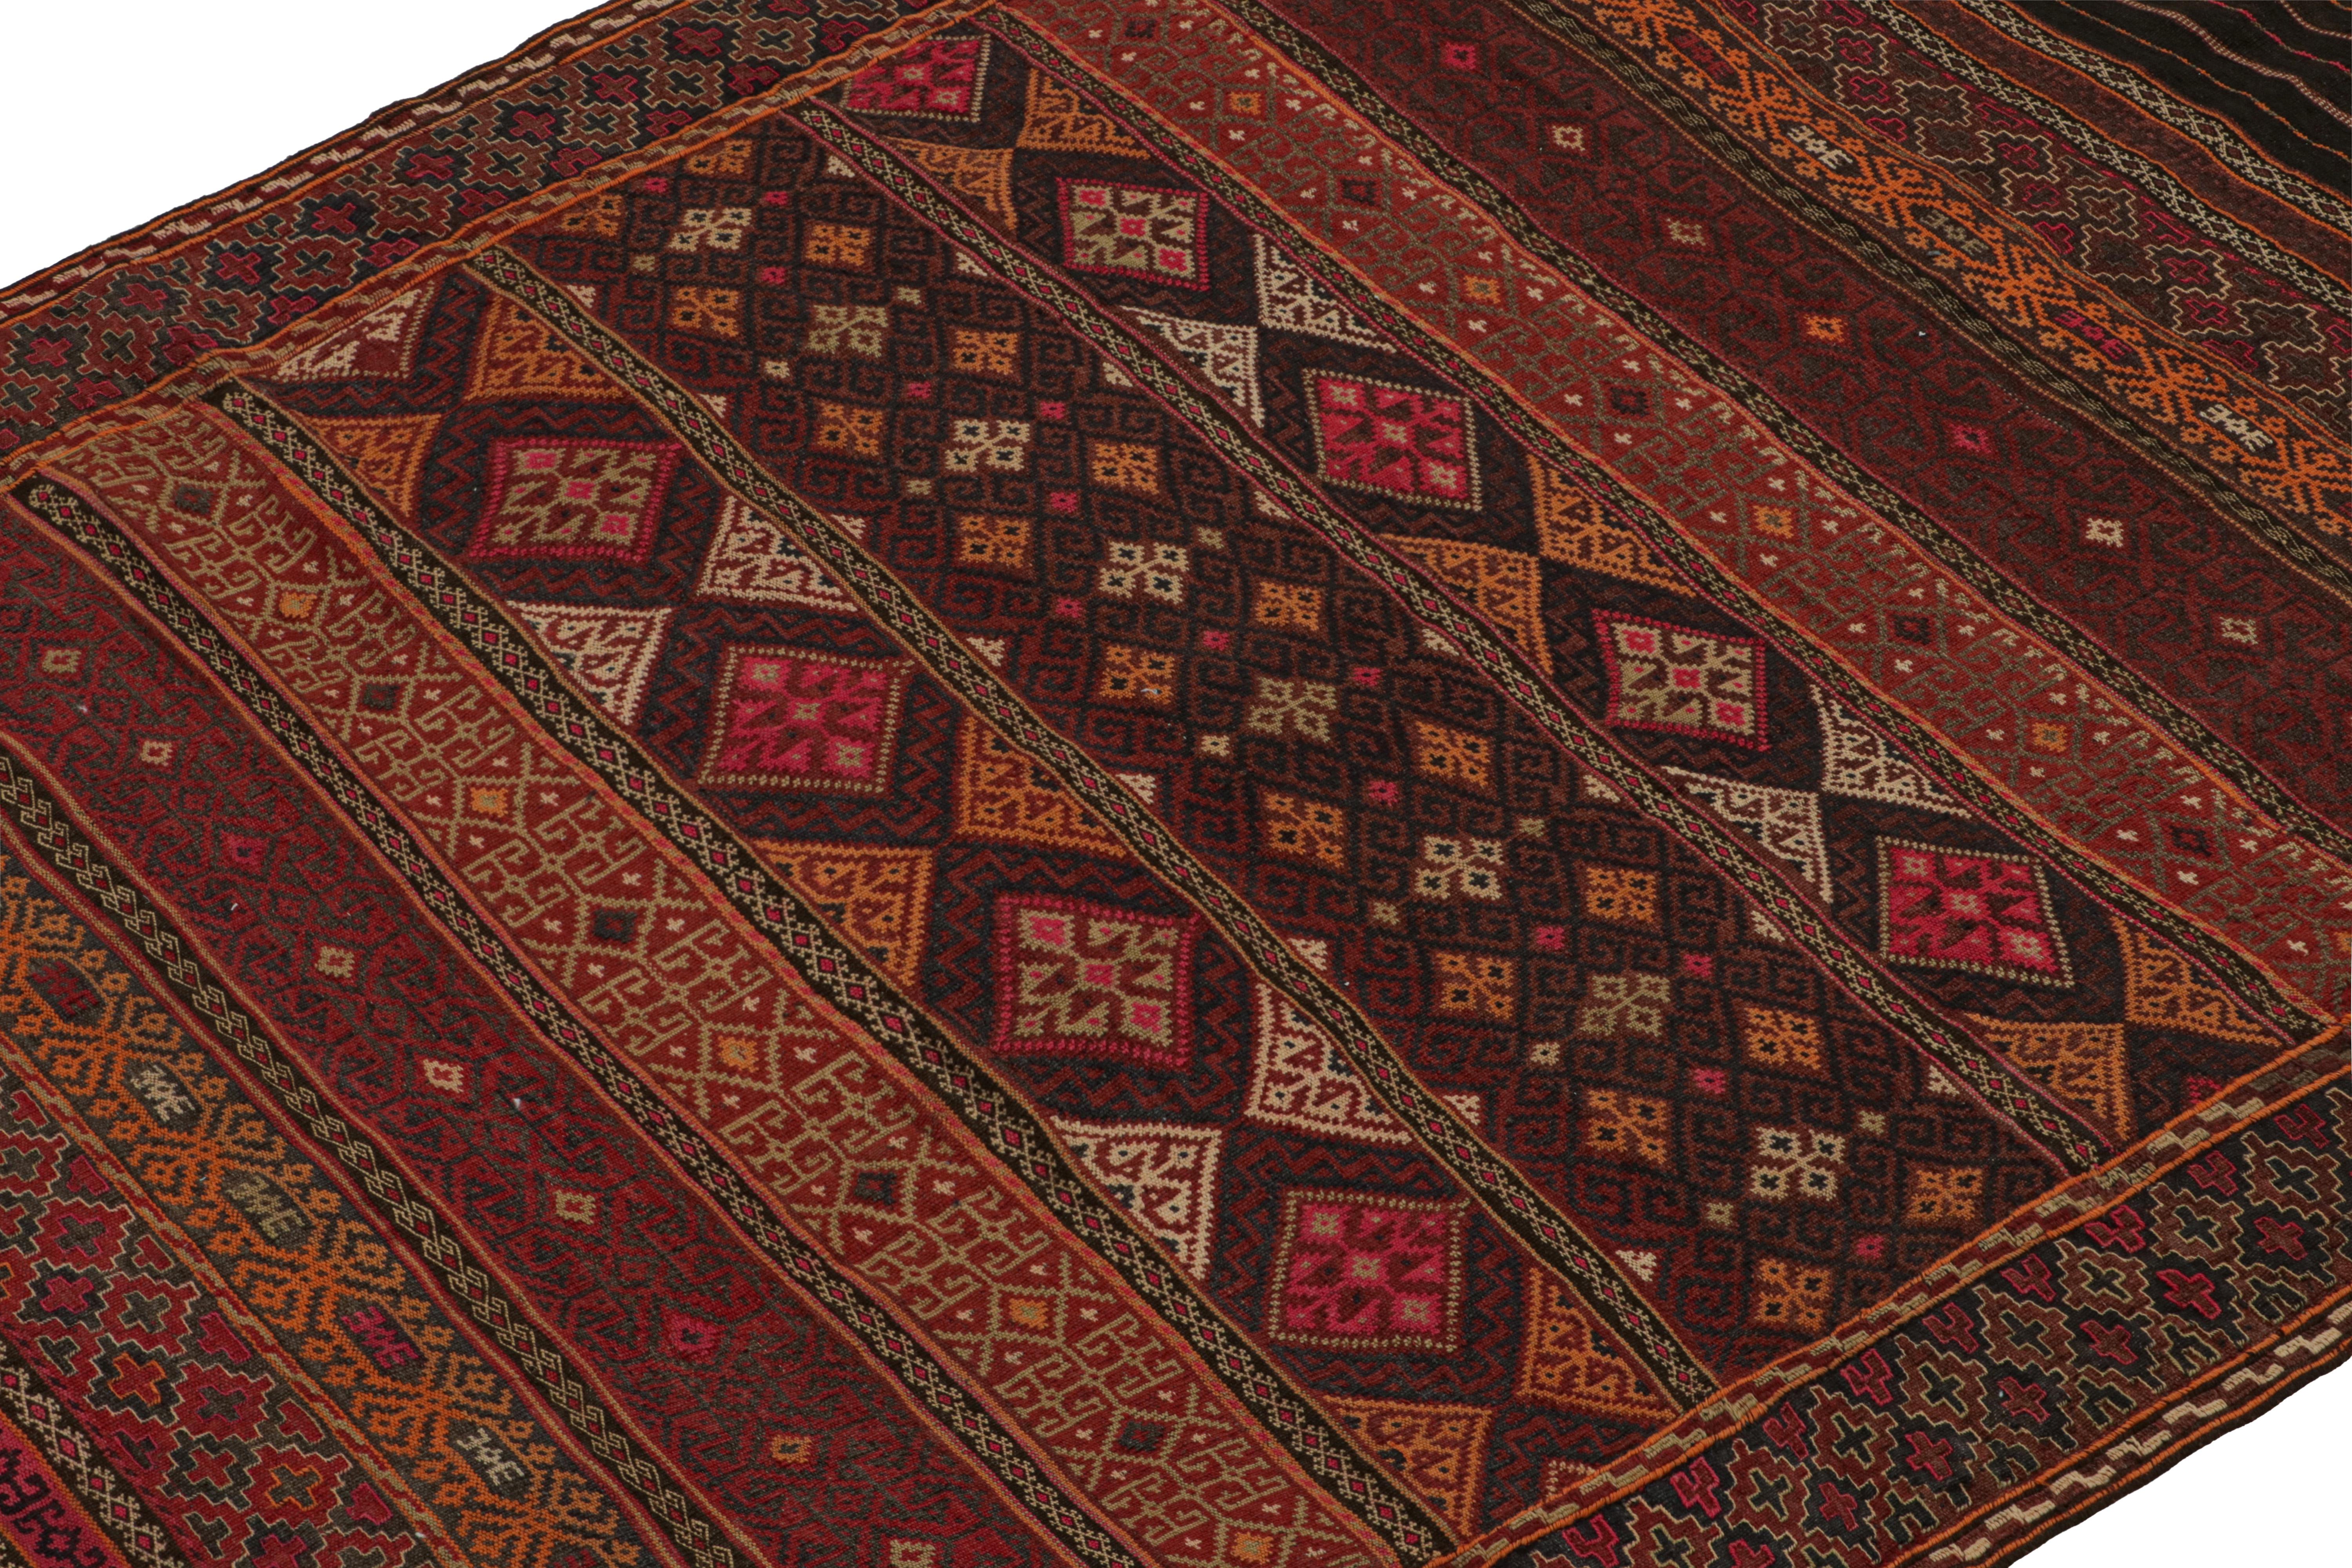 Hand-Woven Vintage Baluch Tribal Kilim in Brown, Red & Orange Patterns by Rug & Kilim For Sale